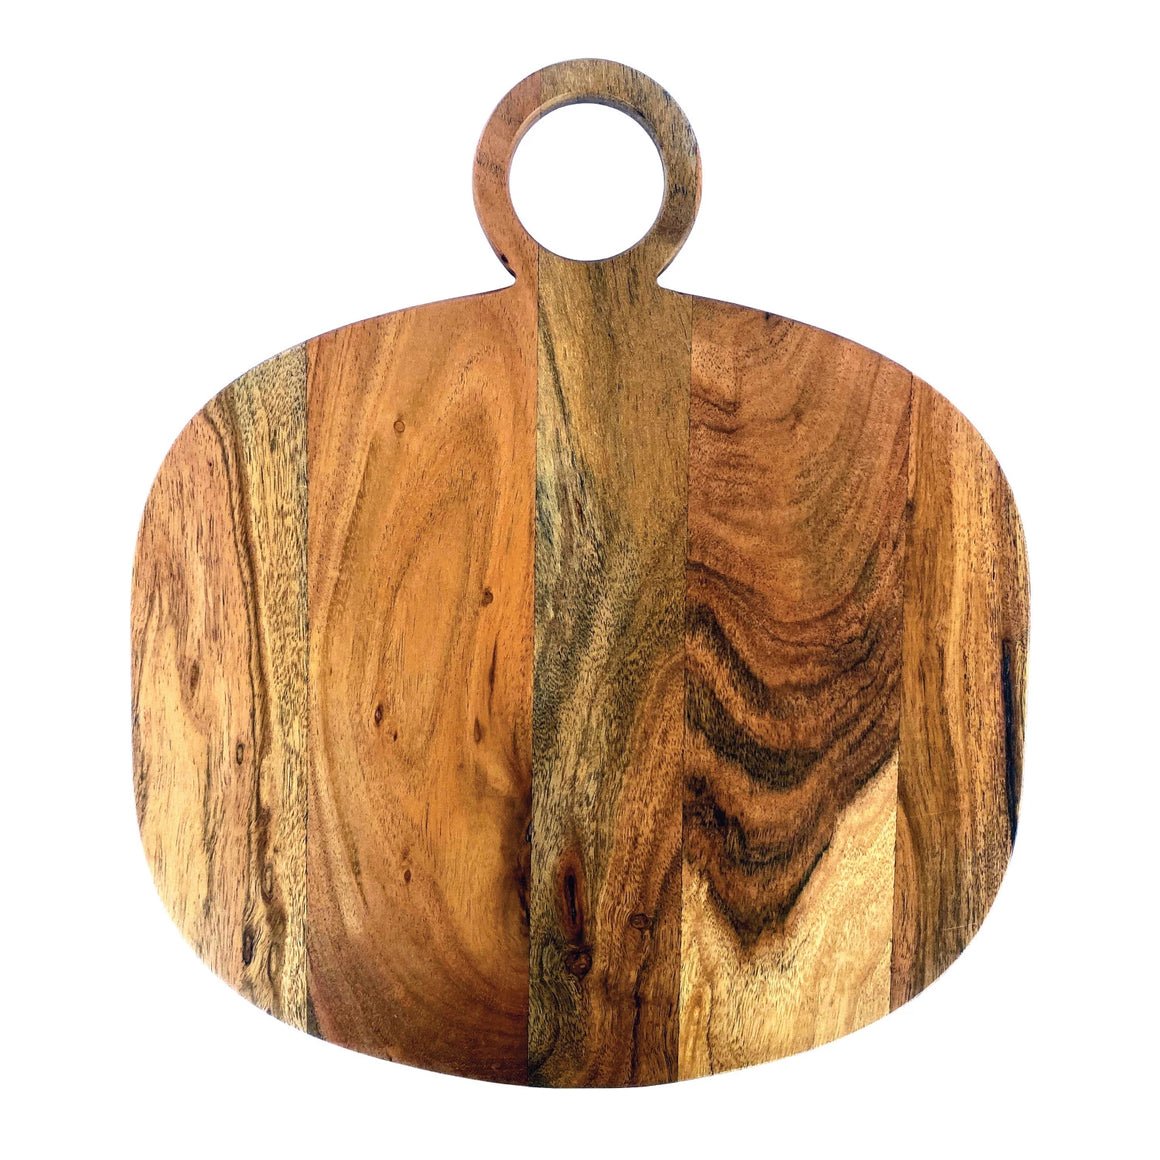 Oval Board with Round Handle